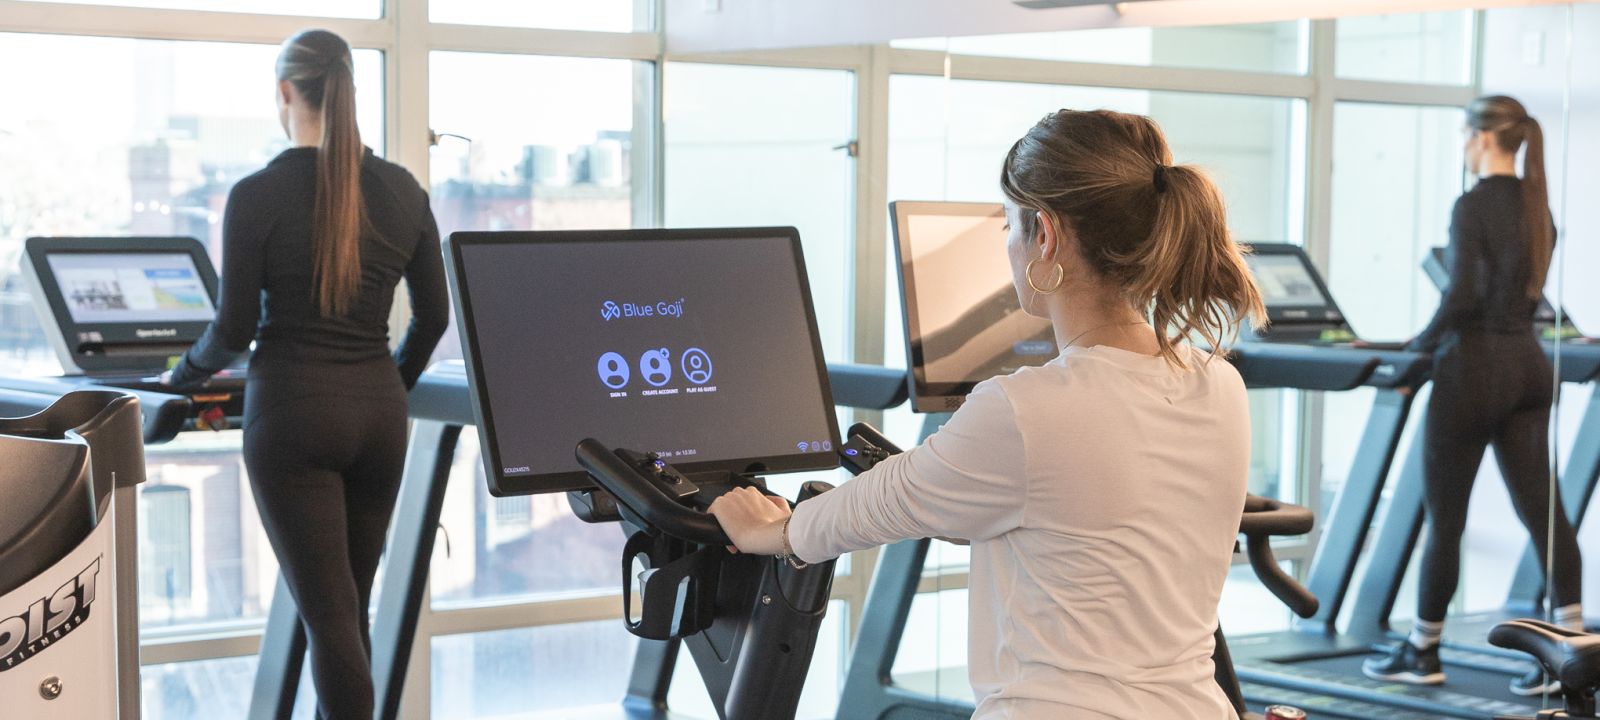 A Woman Working Out On A Treadmill In A Gym